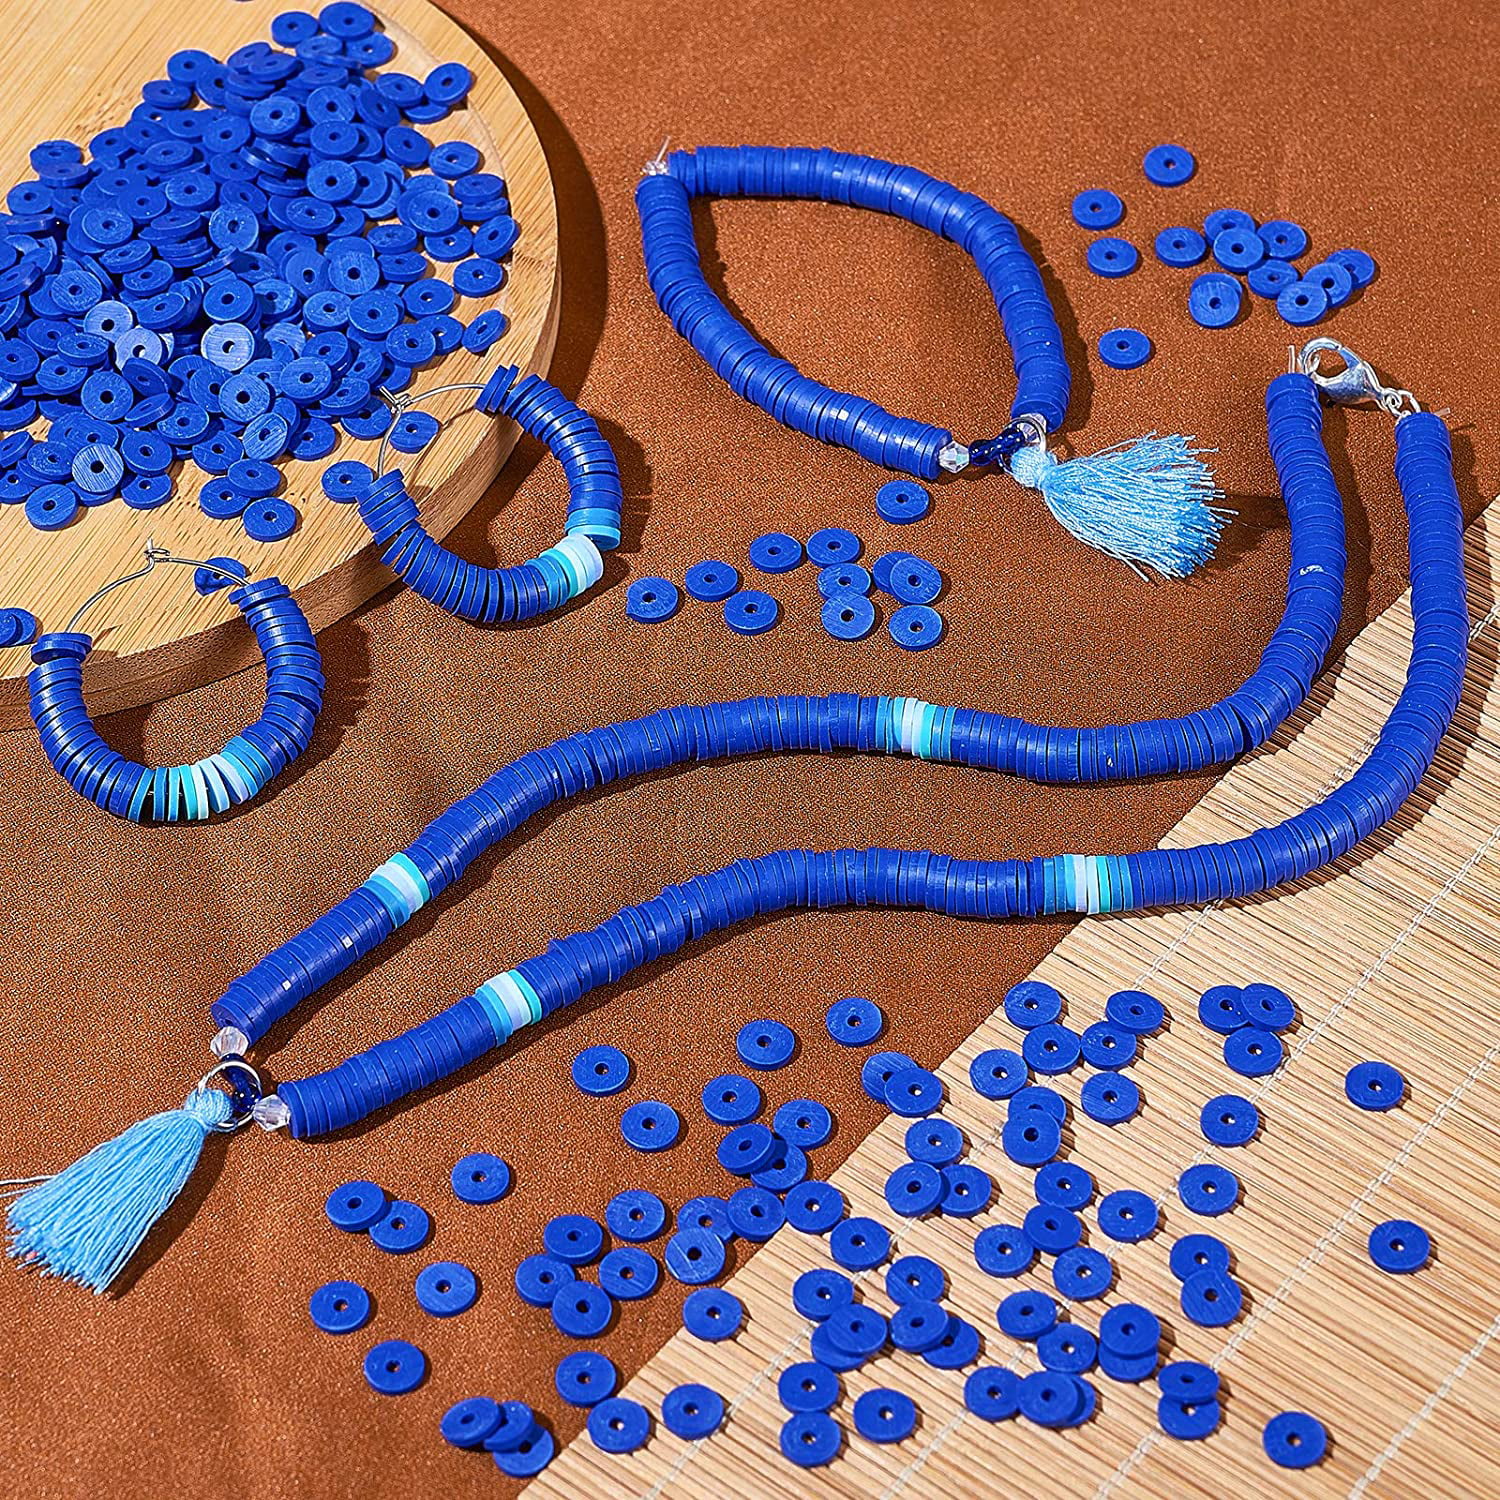 VIVP 2000PCS Clay Beads,6MM Blue Polymer Clay Beads Colorful Flat Round  Clay Beads for DIY Jewelry Making Bracelets Necklace Earring